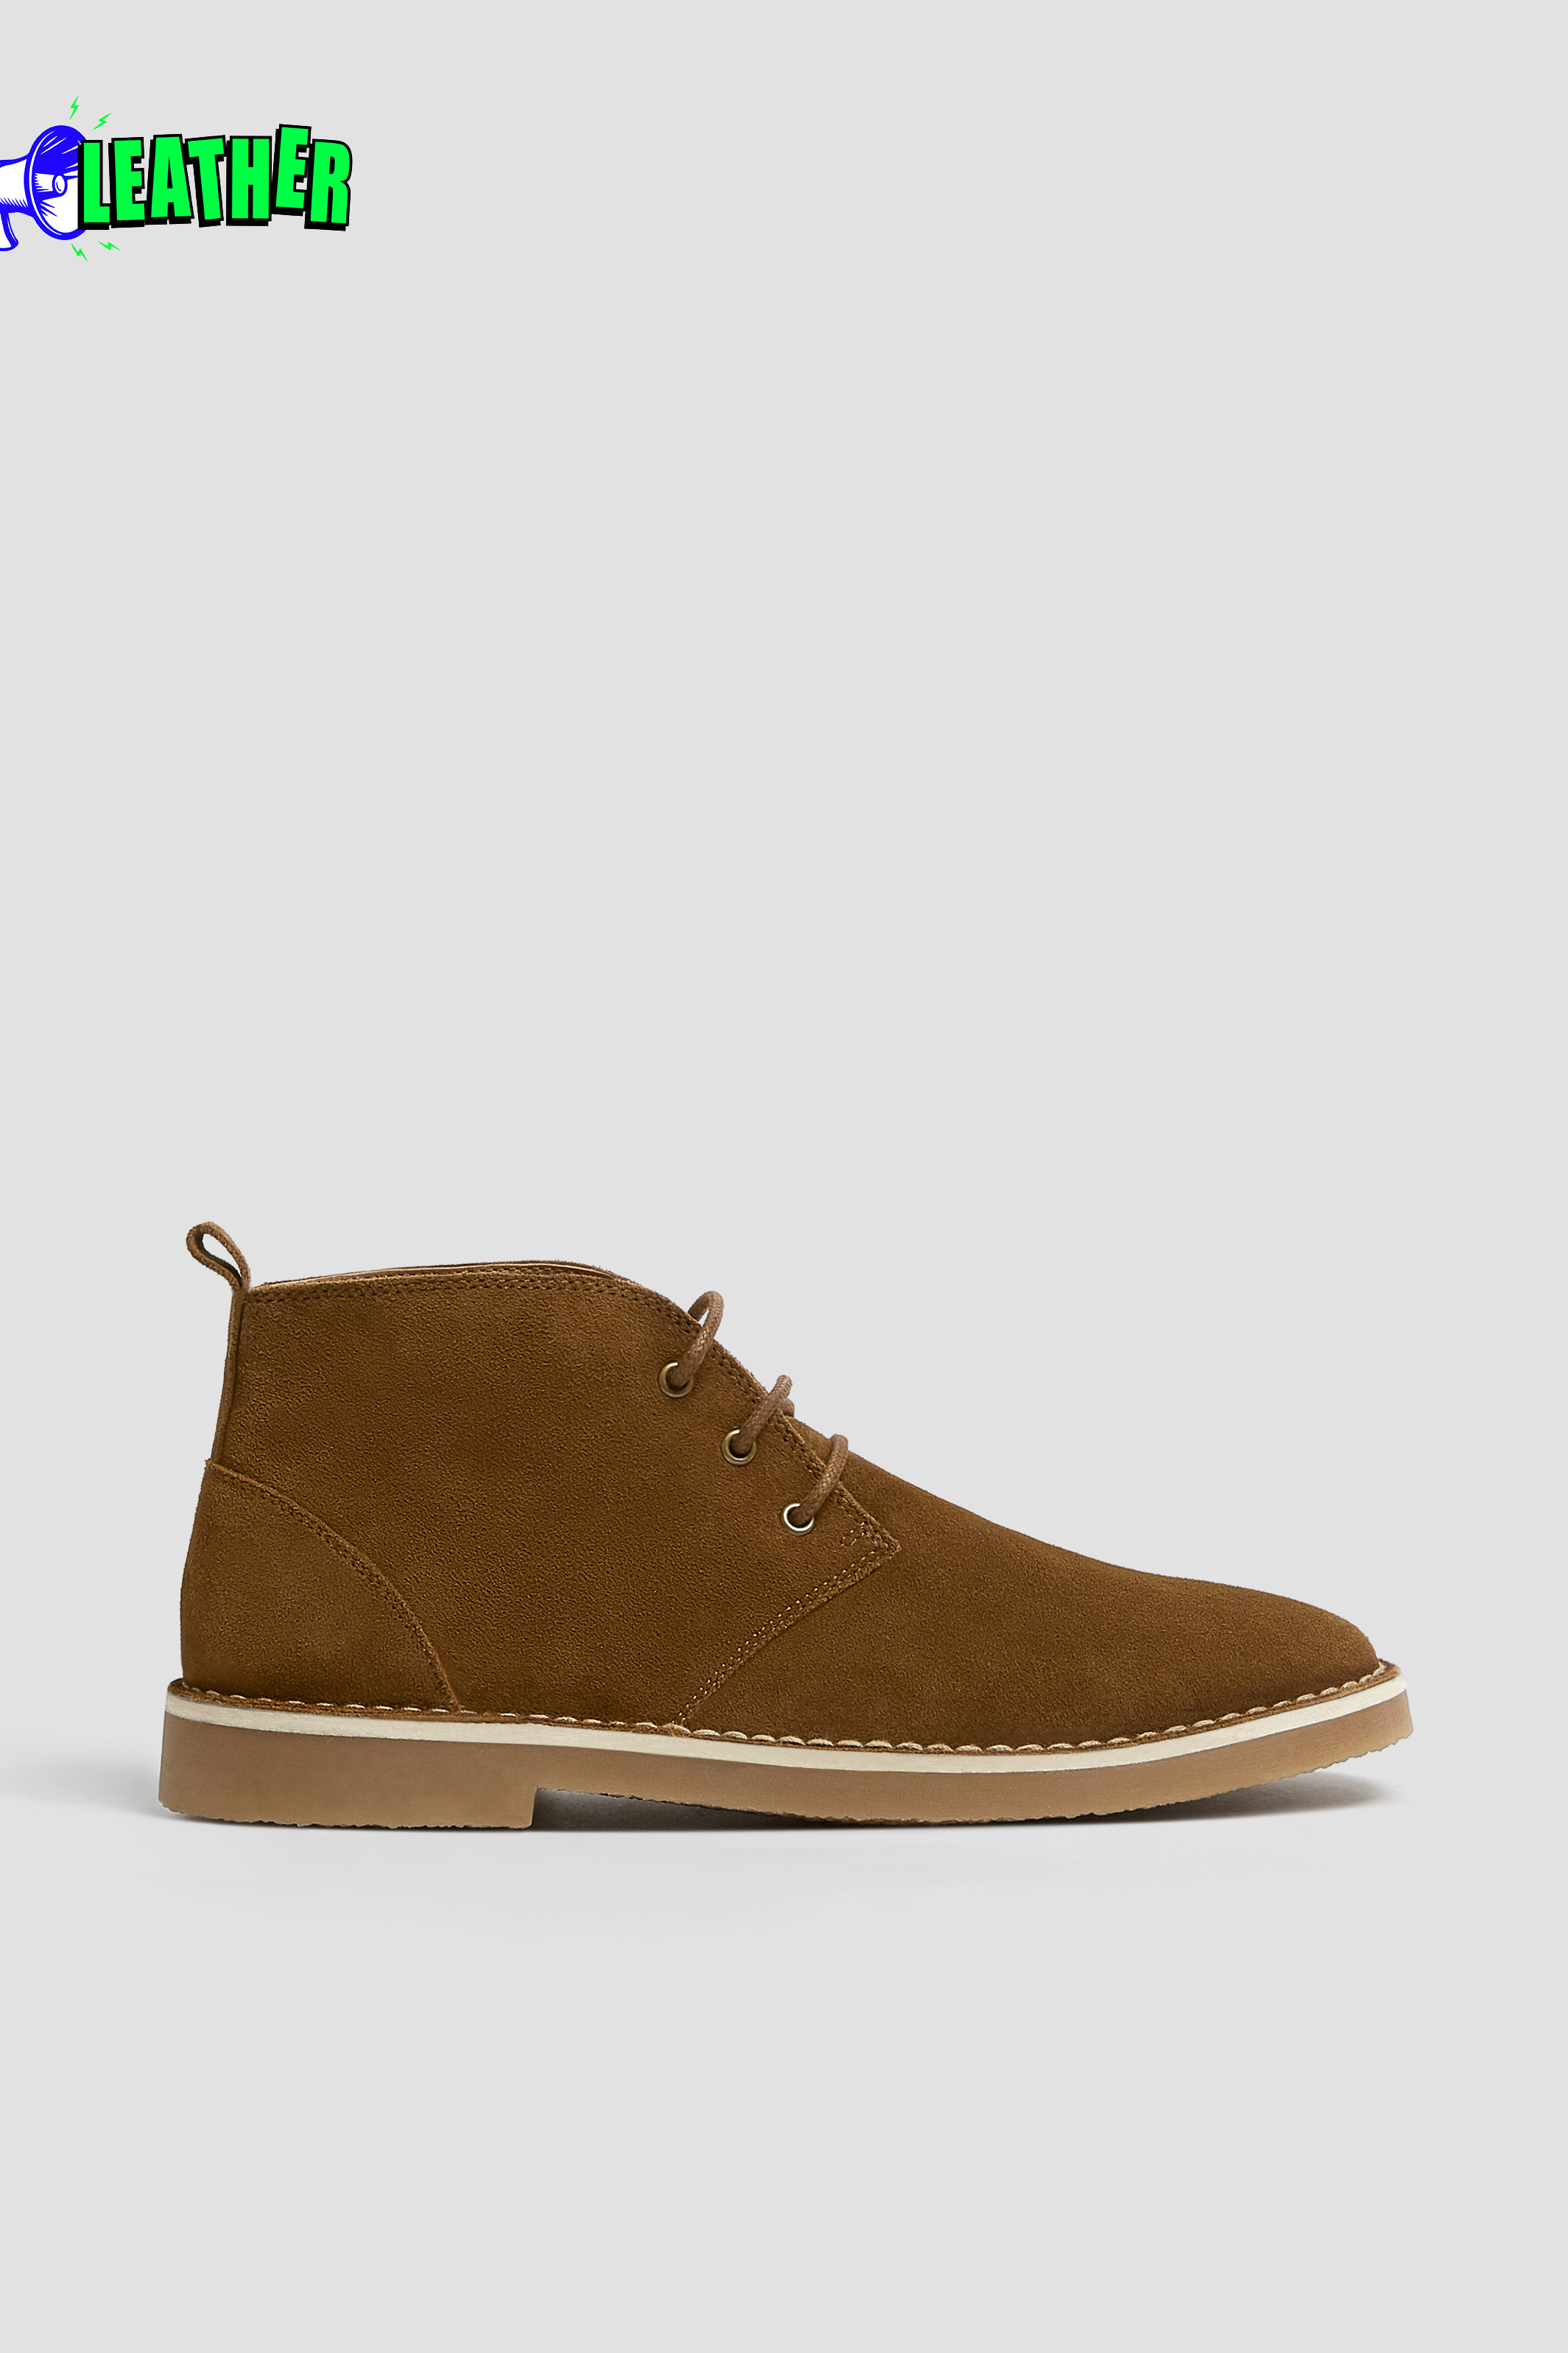 leather desert boots